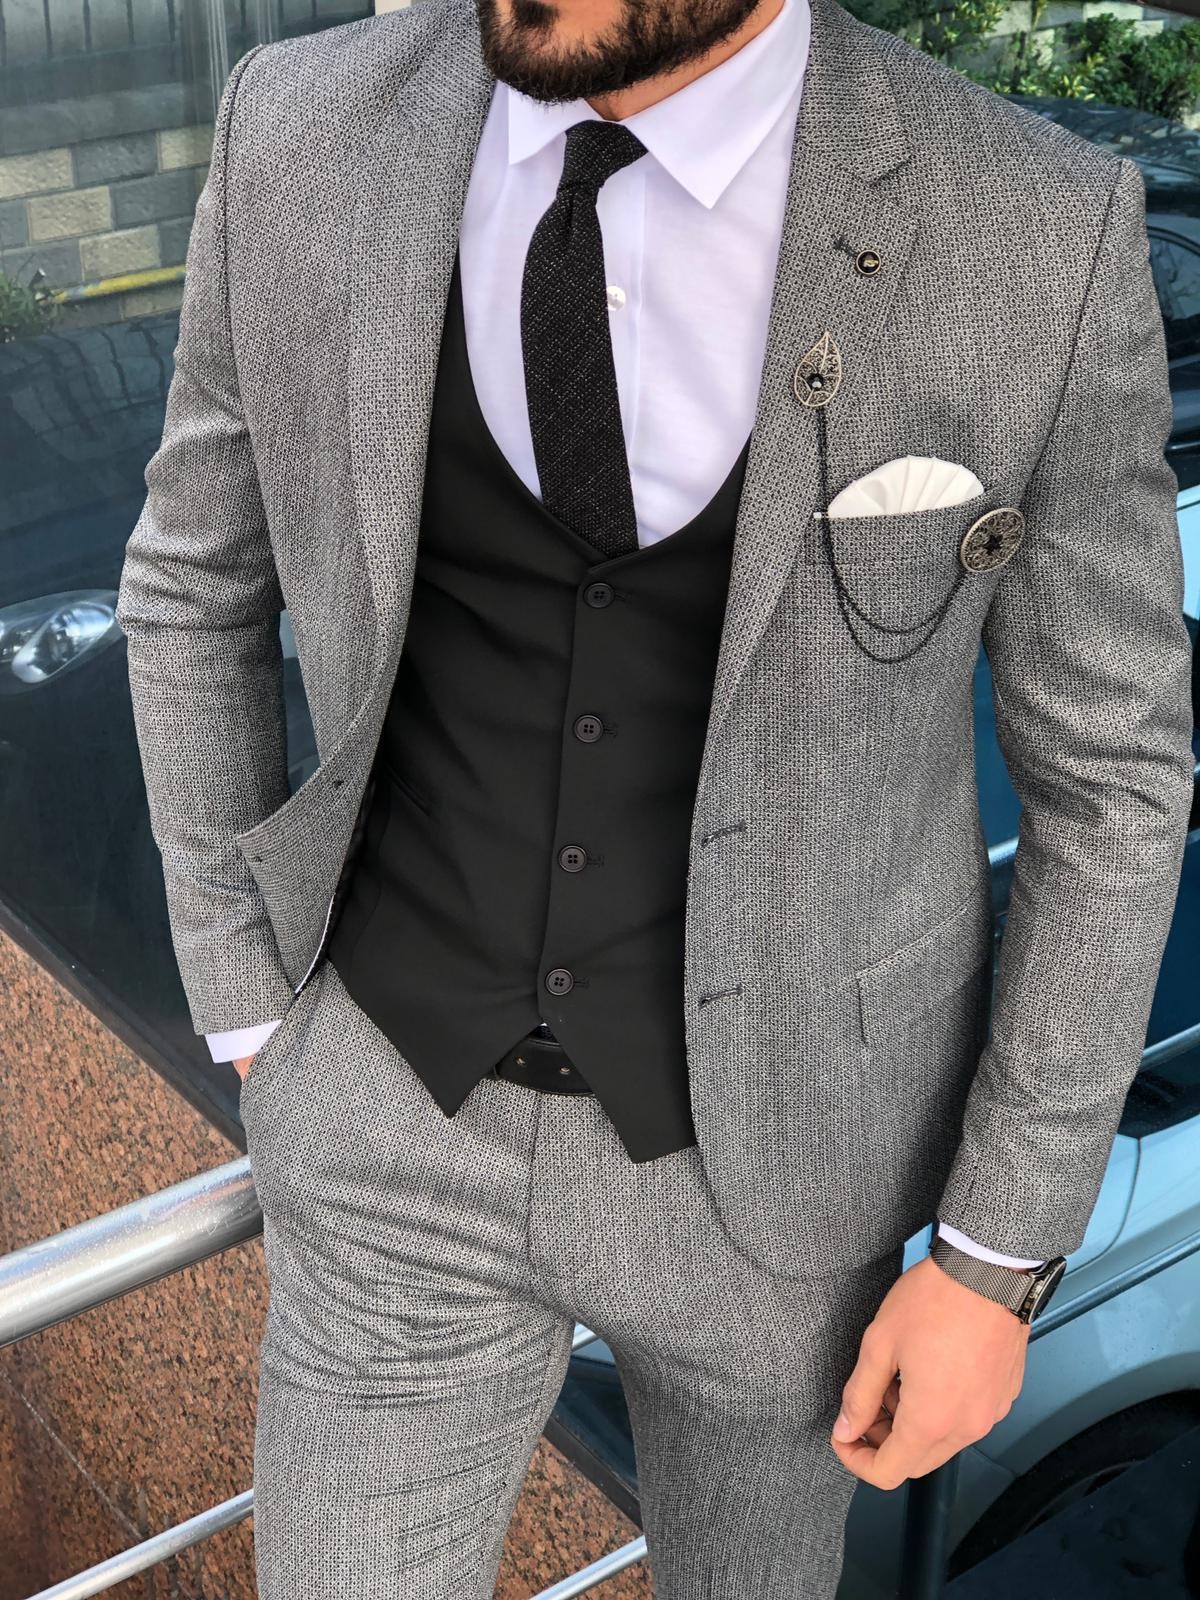 Buy Black Slim Fit Patterned Suit by Gentwith.com with Free Shipping